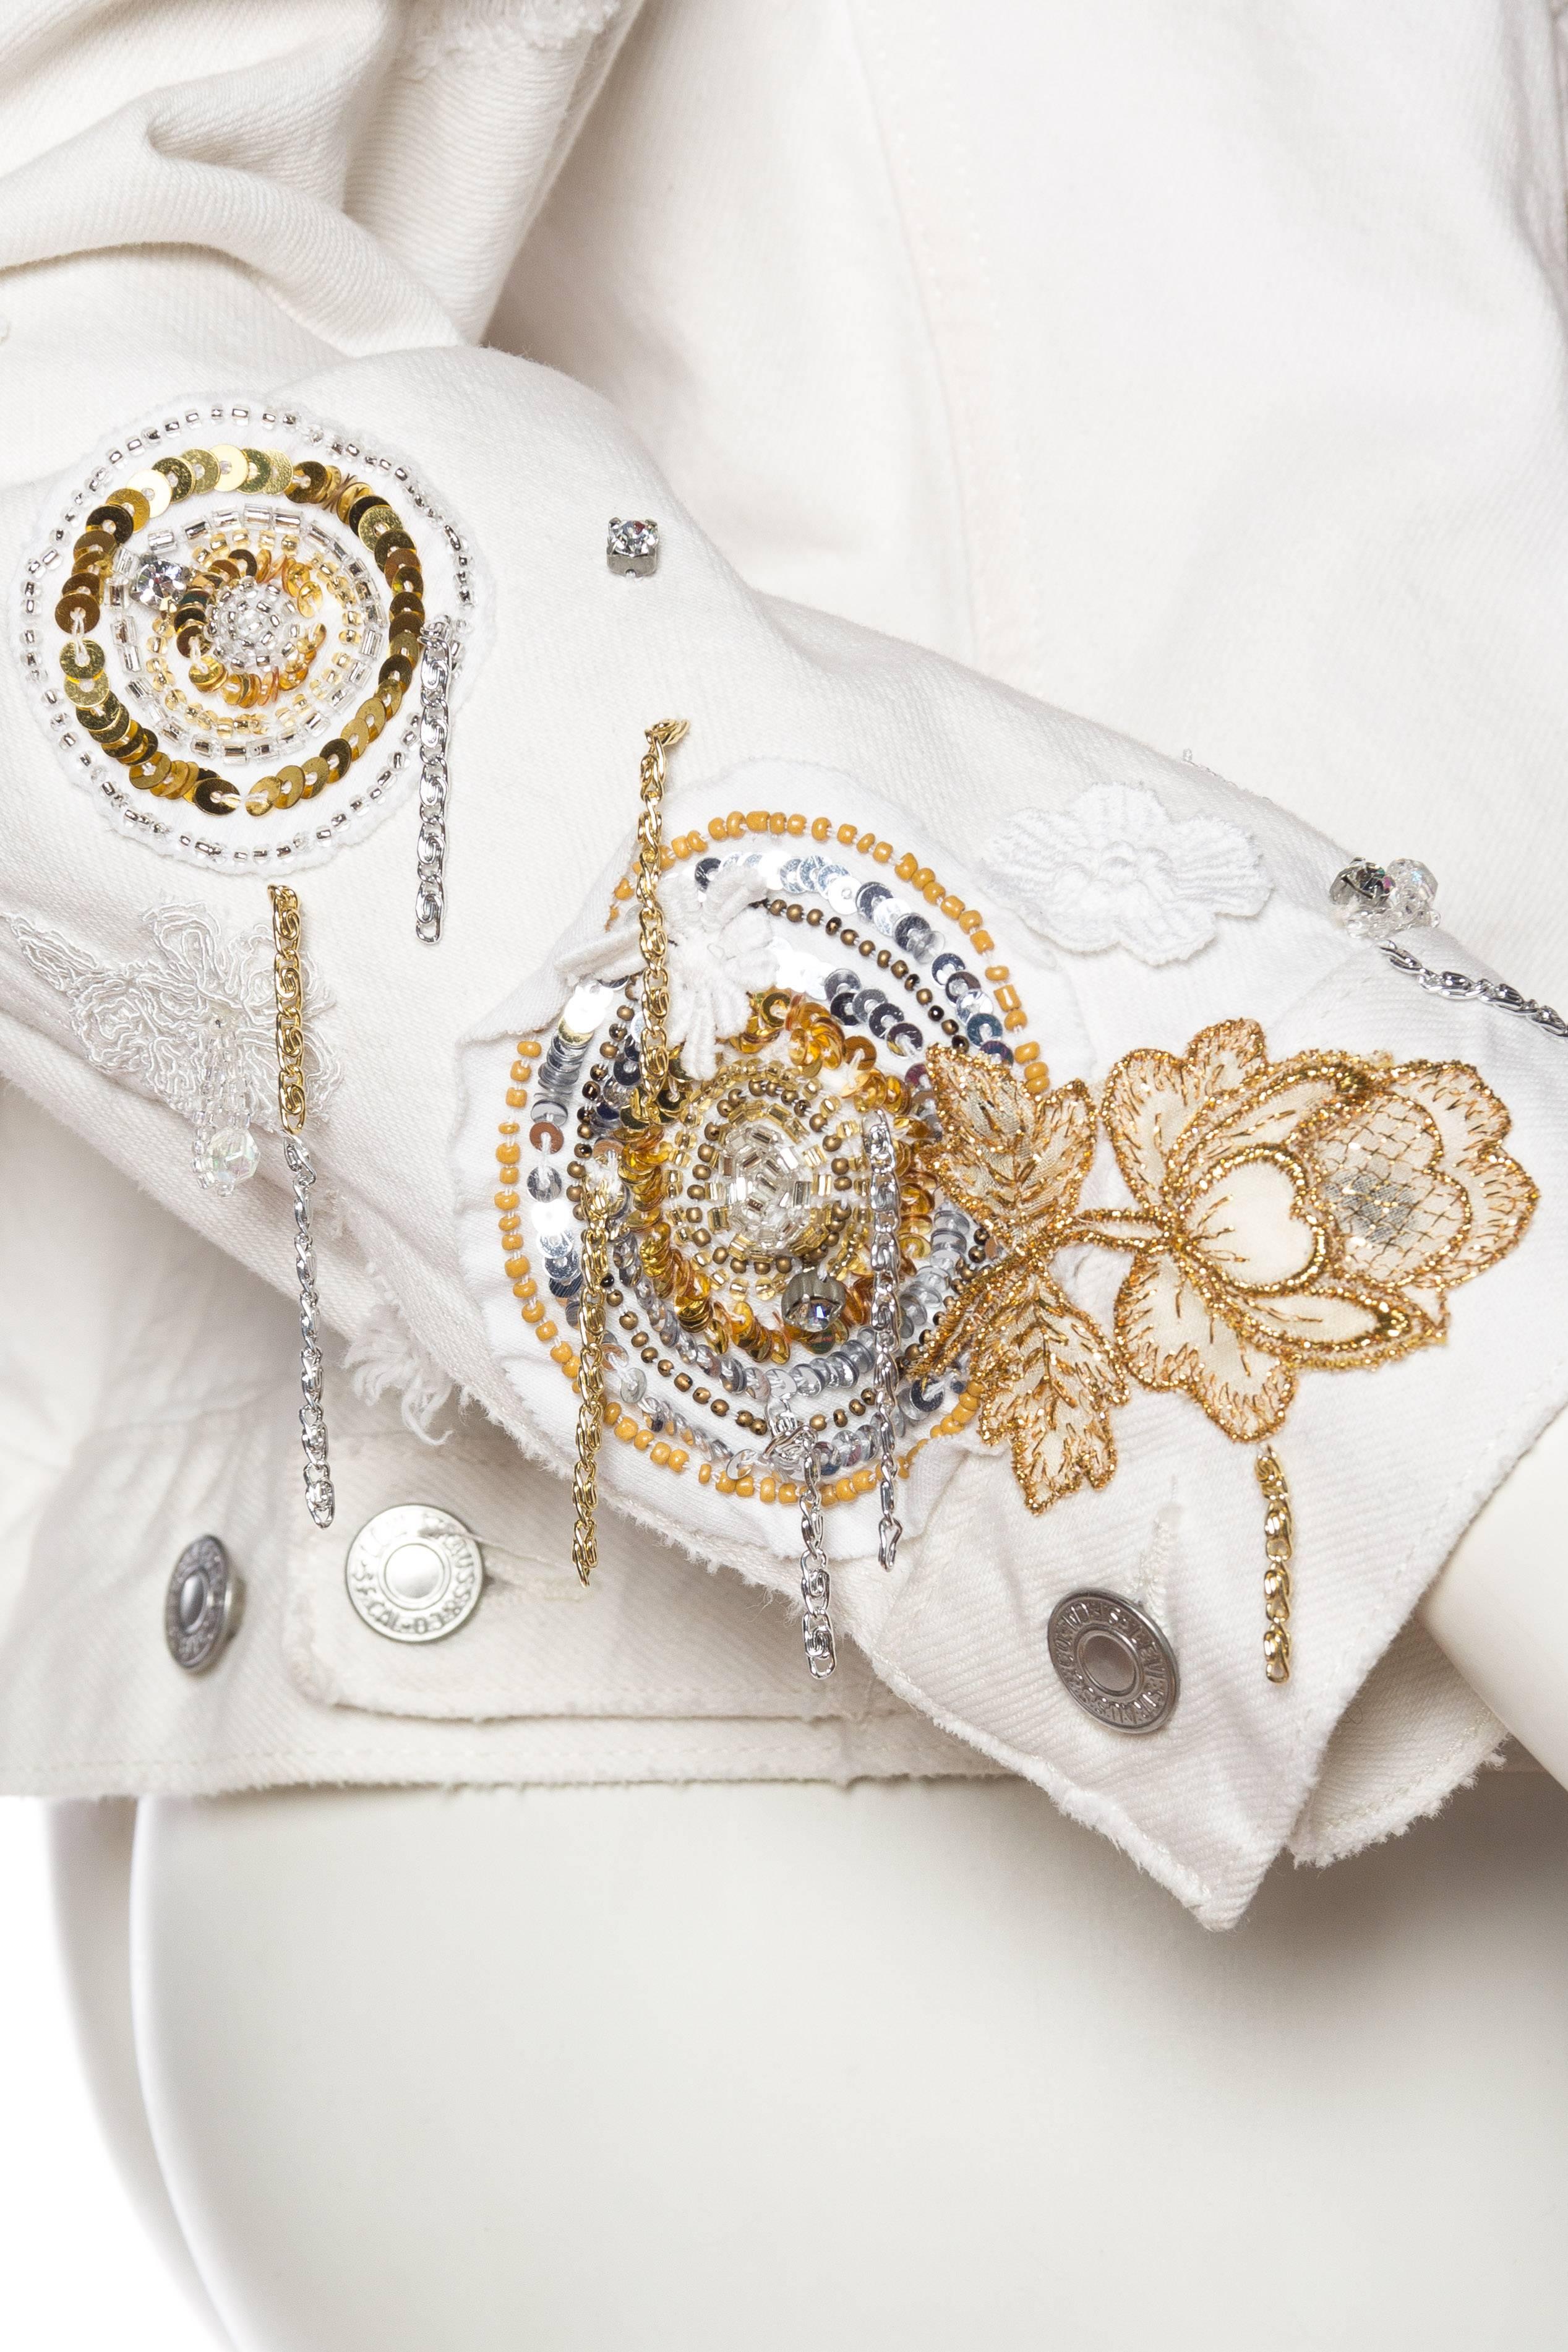 MORPHEW COLLECTION X UNLEASHED White Cotton Denim Gold Sequin, Lace & Crystal E 3